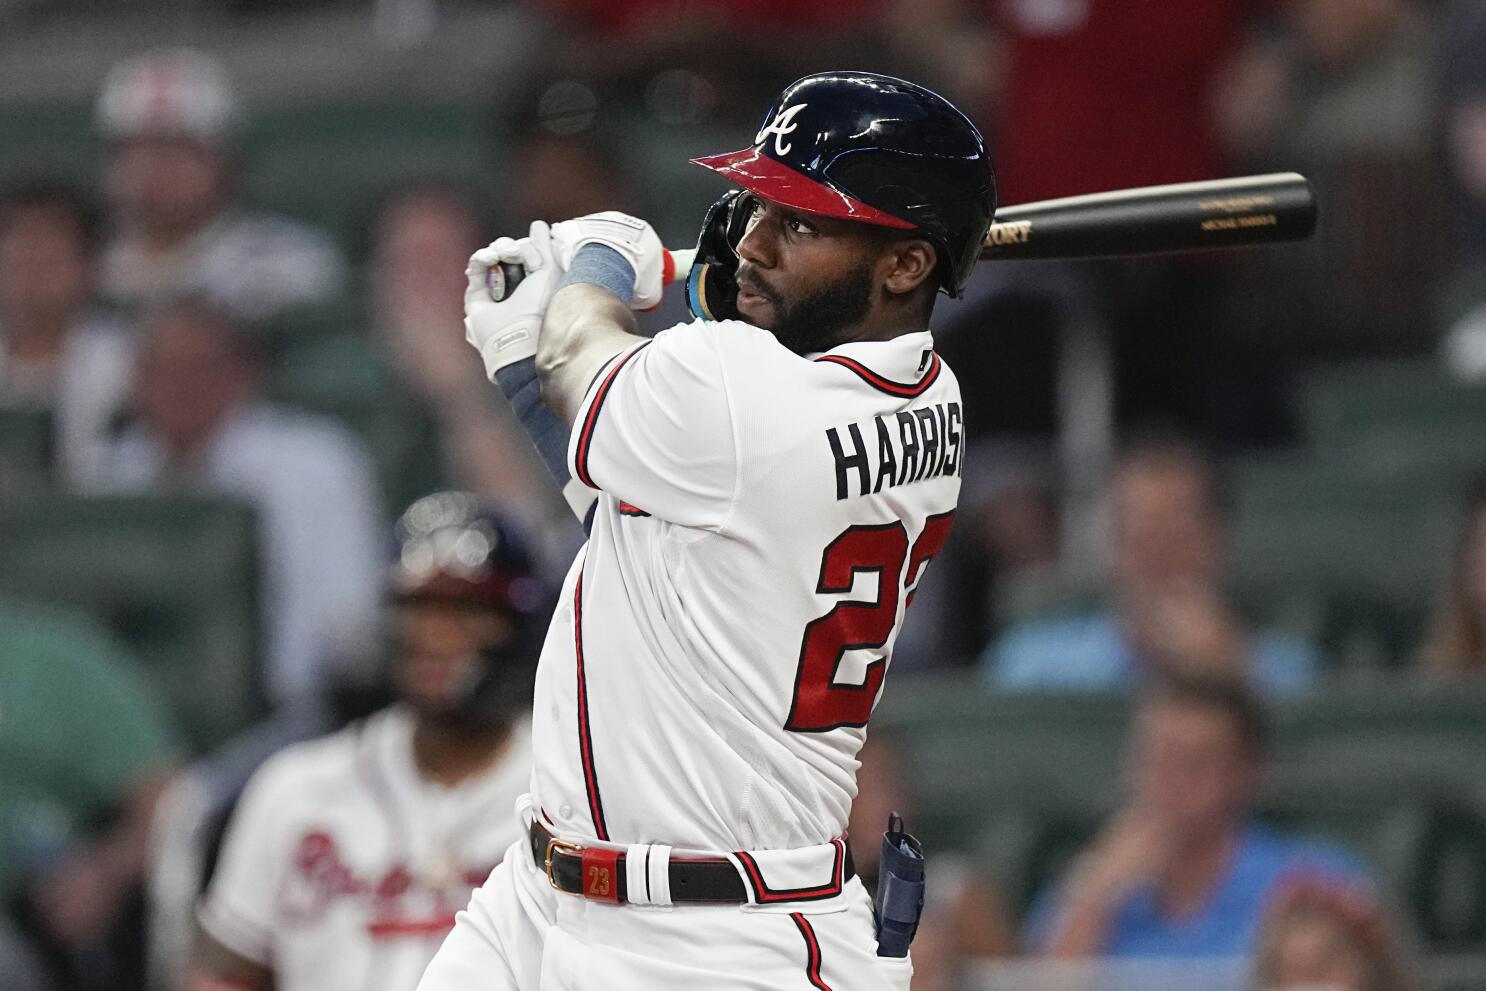 Braves: What should we expect from Michael Harris II moving